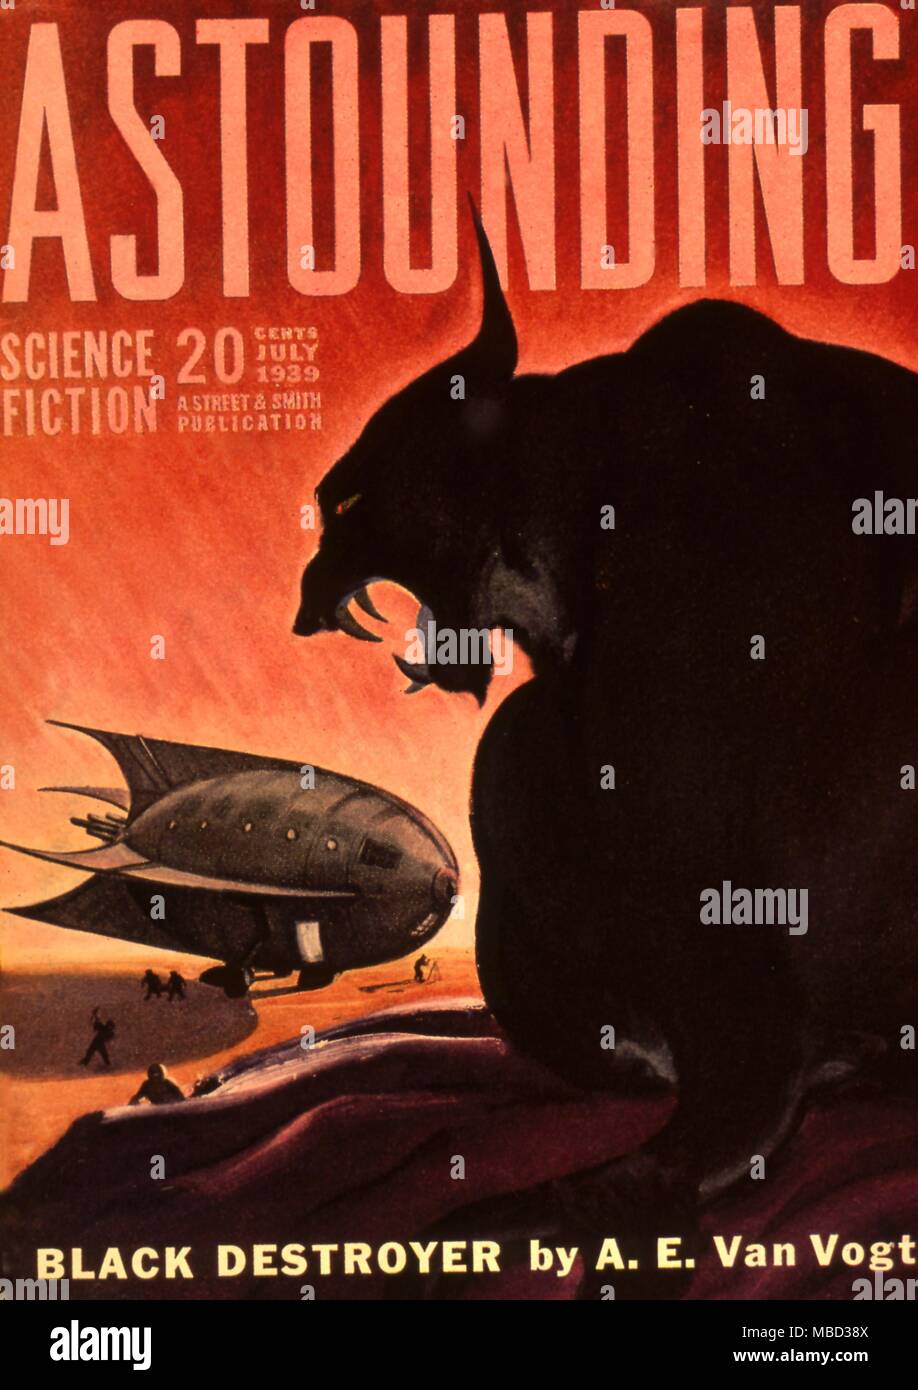 Science Fiction and Horror Magazines Cover of Astounding Science Fiction. July 1939. Illustration to 'Black Destroyer'. Stock Photo